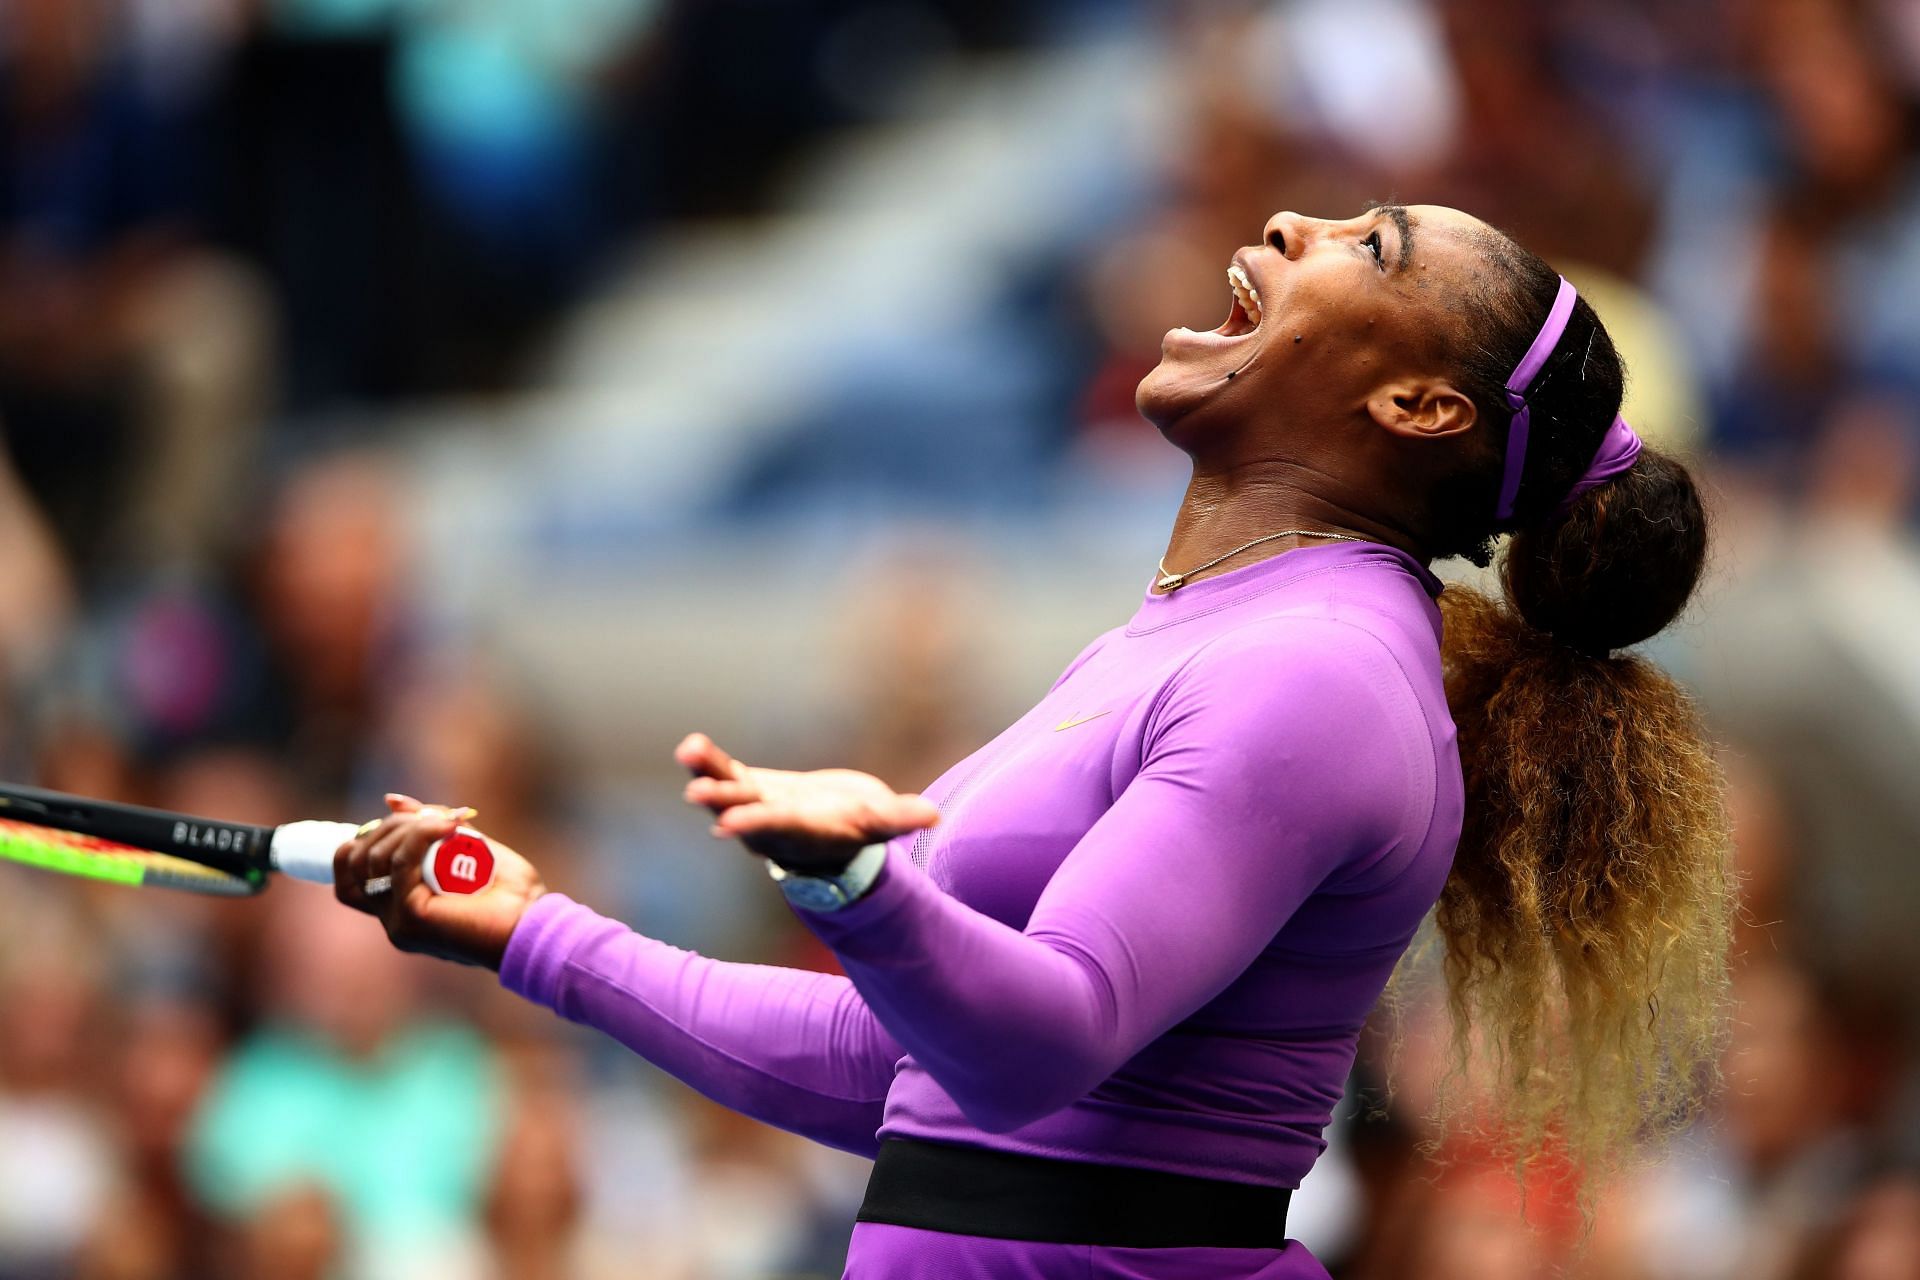 Serena Williams failed in her quest to win a 24th Grand Slam title at the 2019 US Open